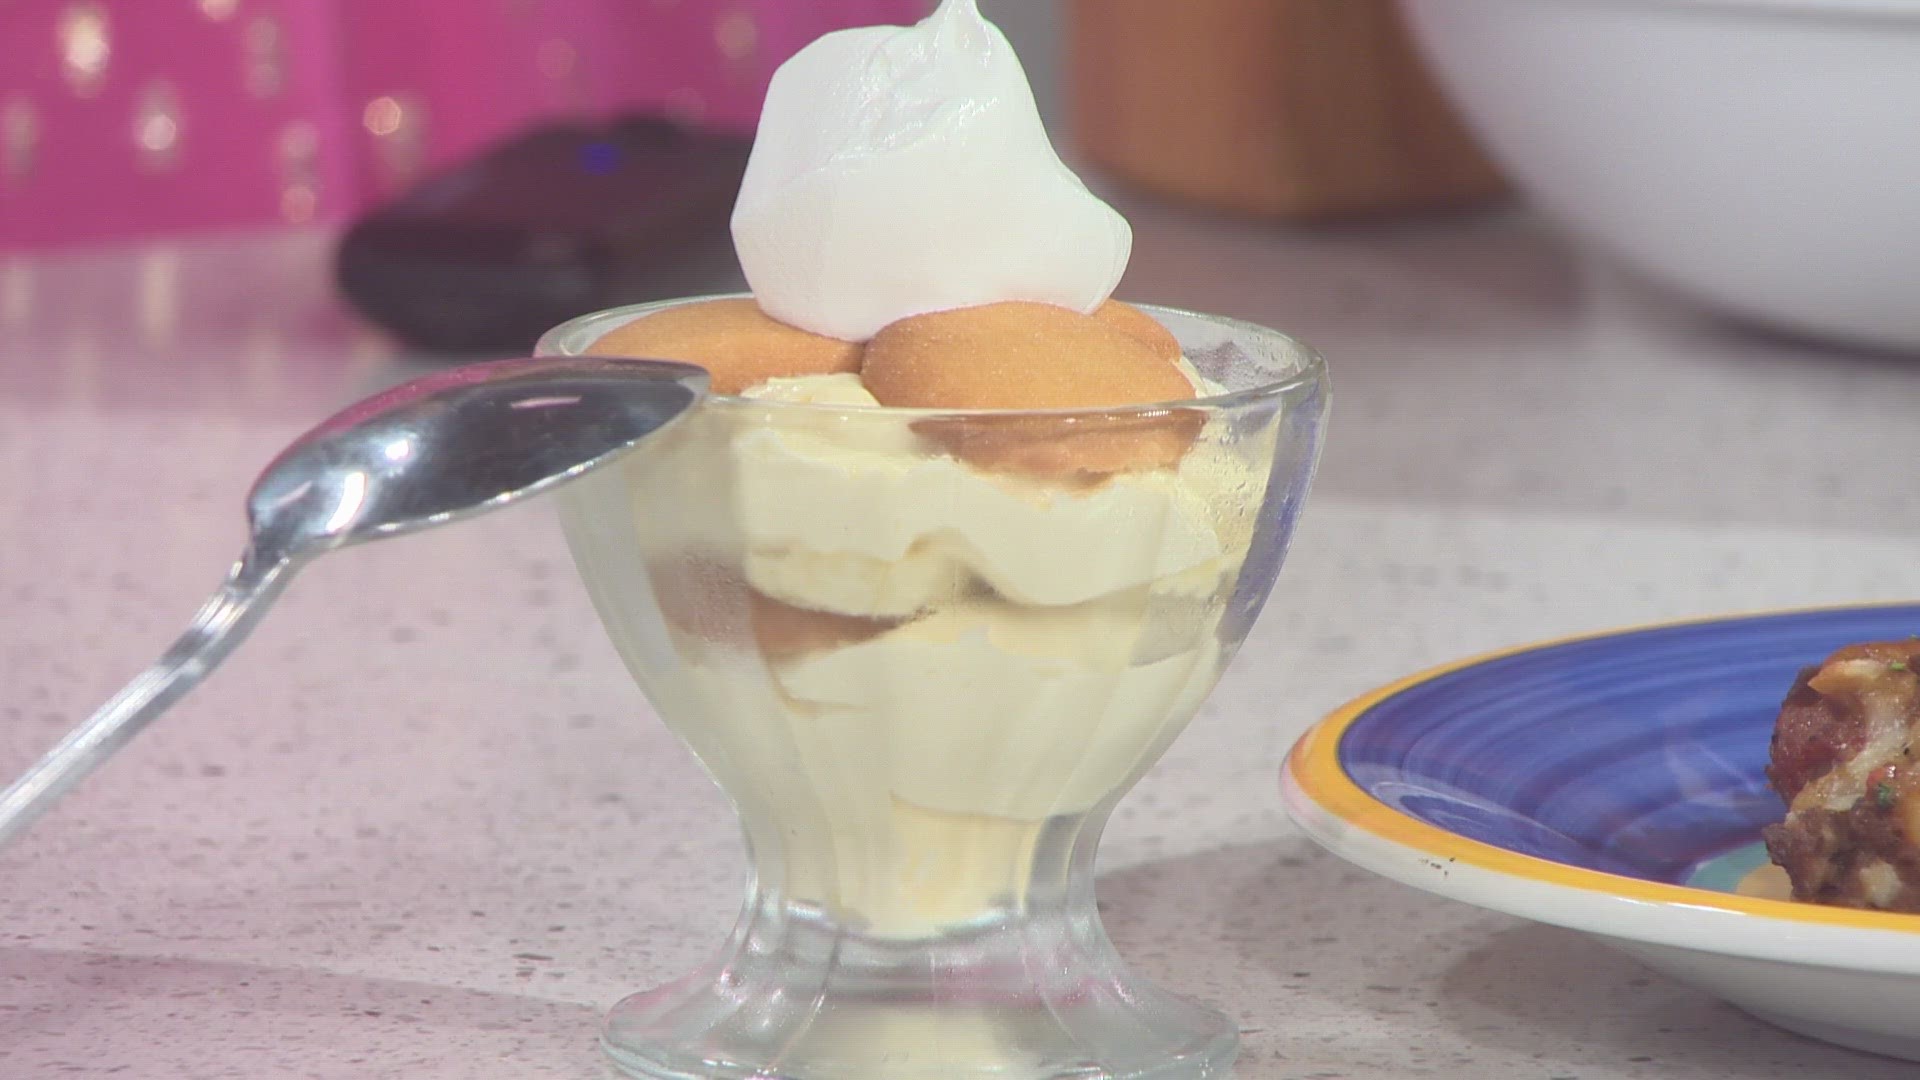 Chef Kevin Belton cooks up Cheeseburger Casserole and Banana Pudding cups.